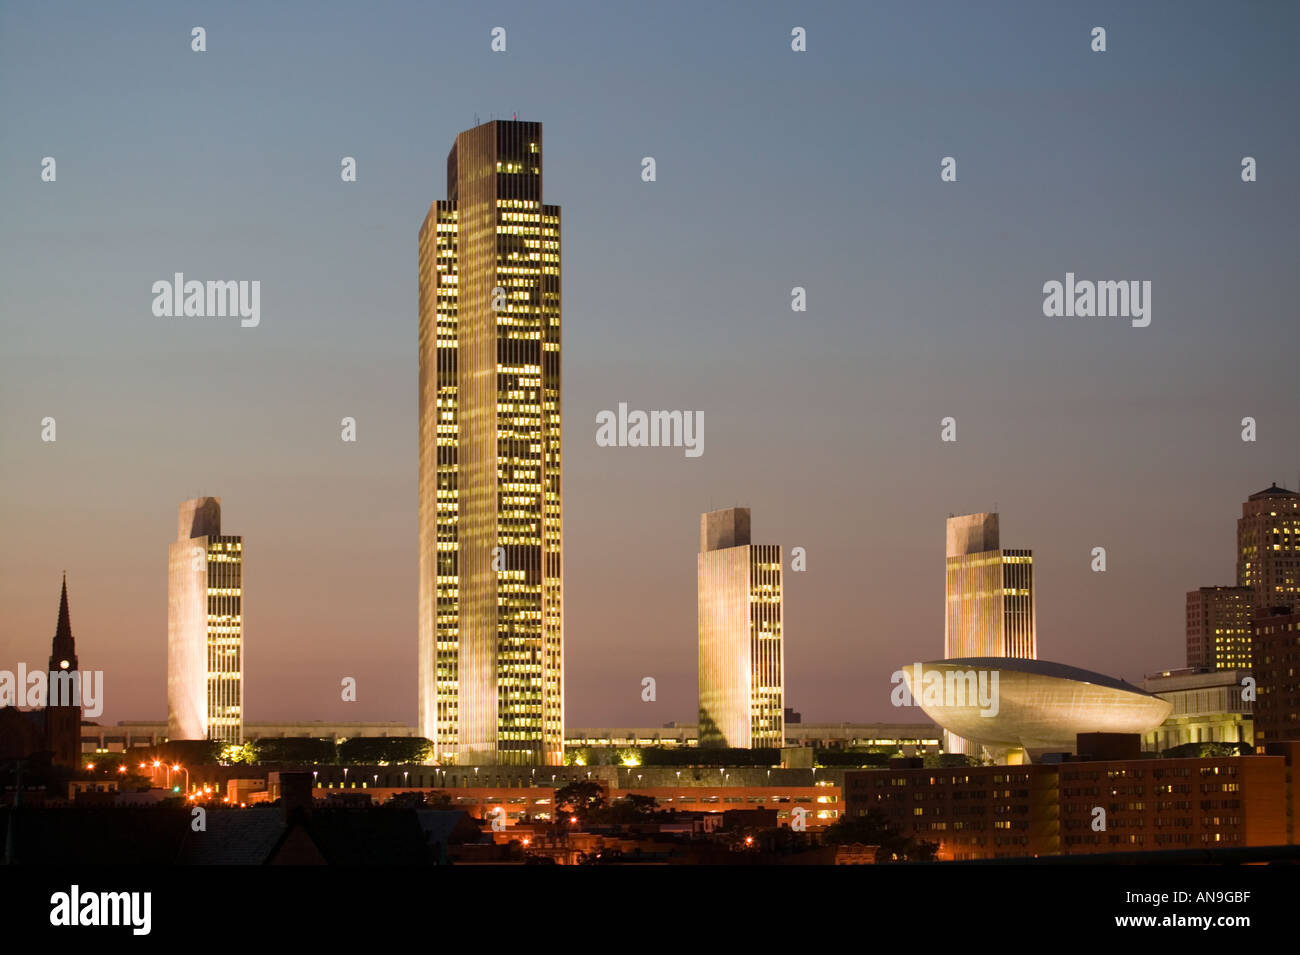 Dusk skyline of Albany capital of New York Empire Plaza State Office Buildings and The Egg Stock Photo